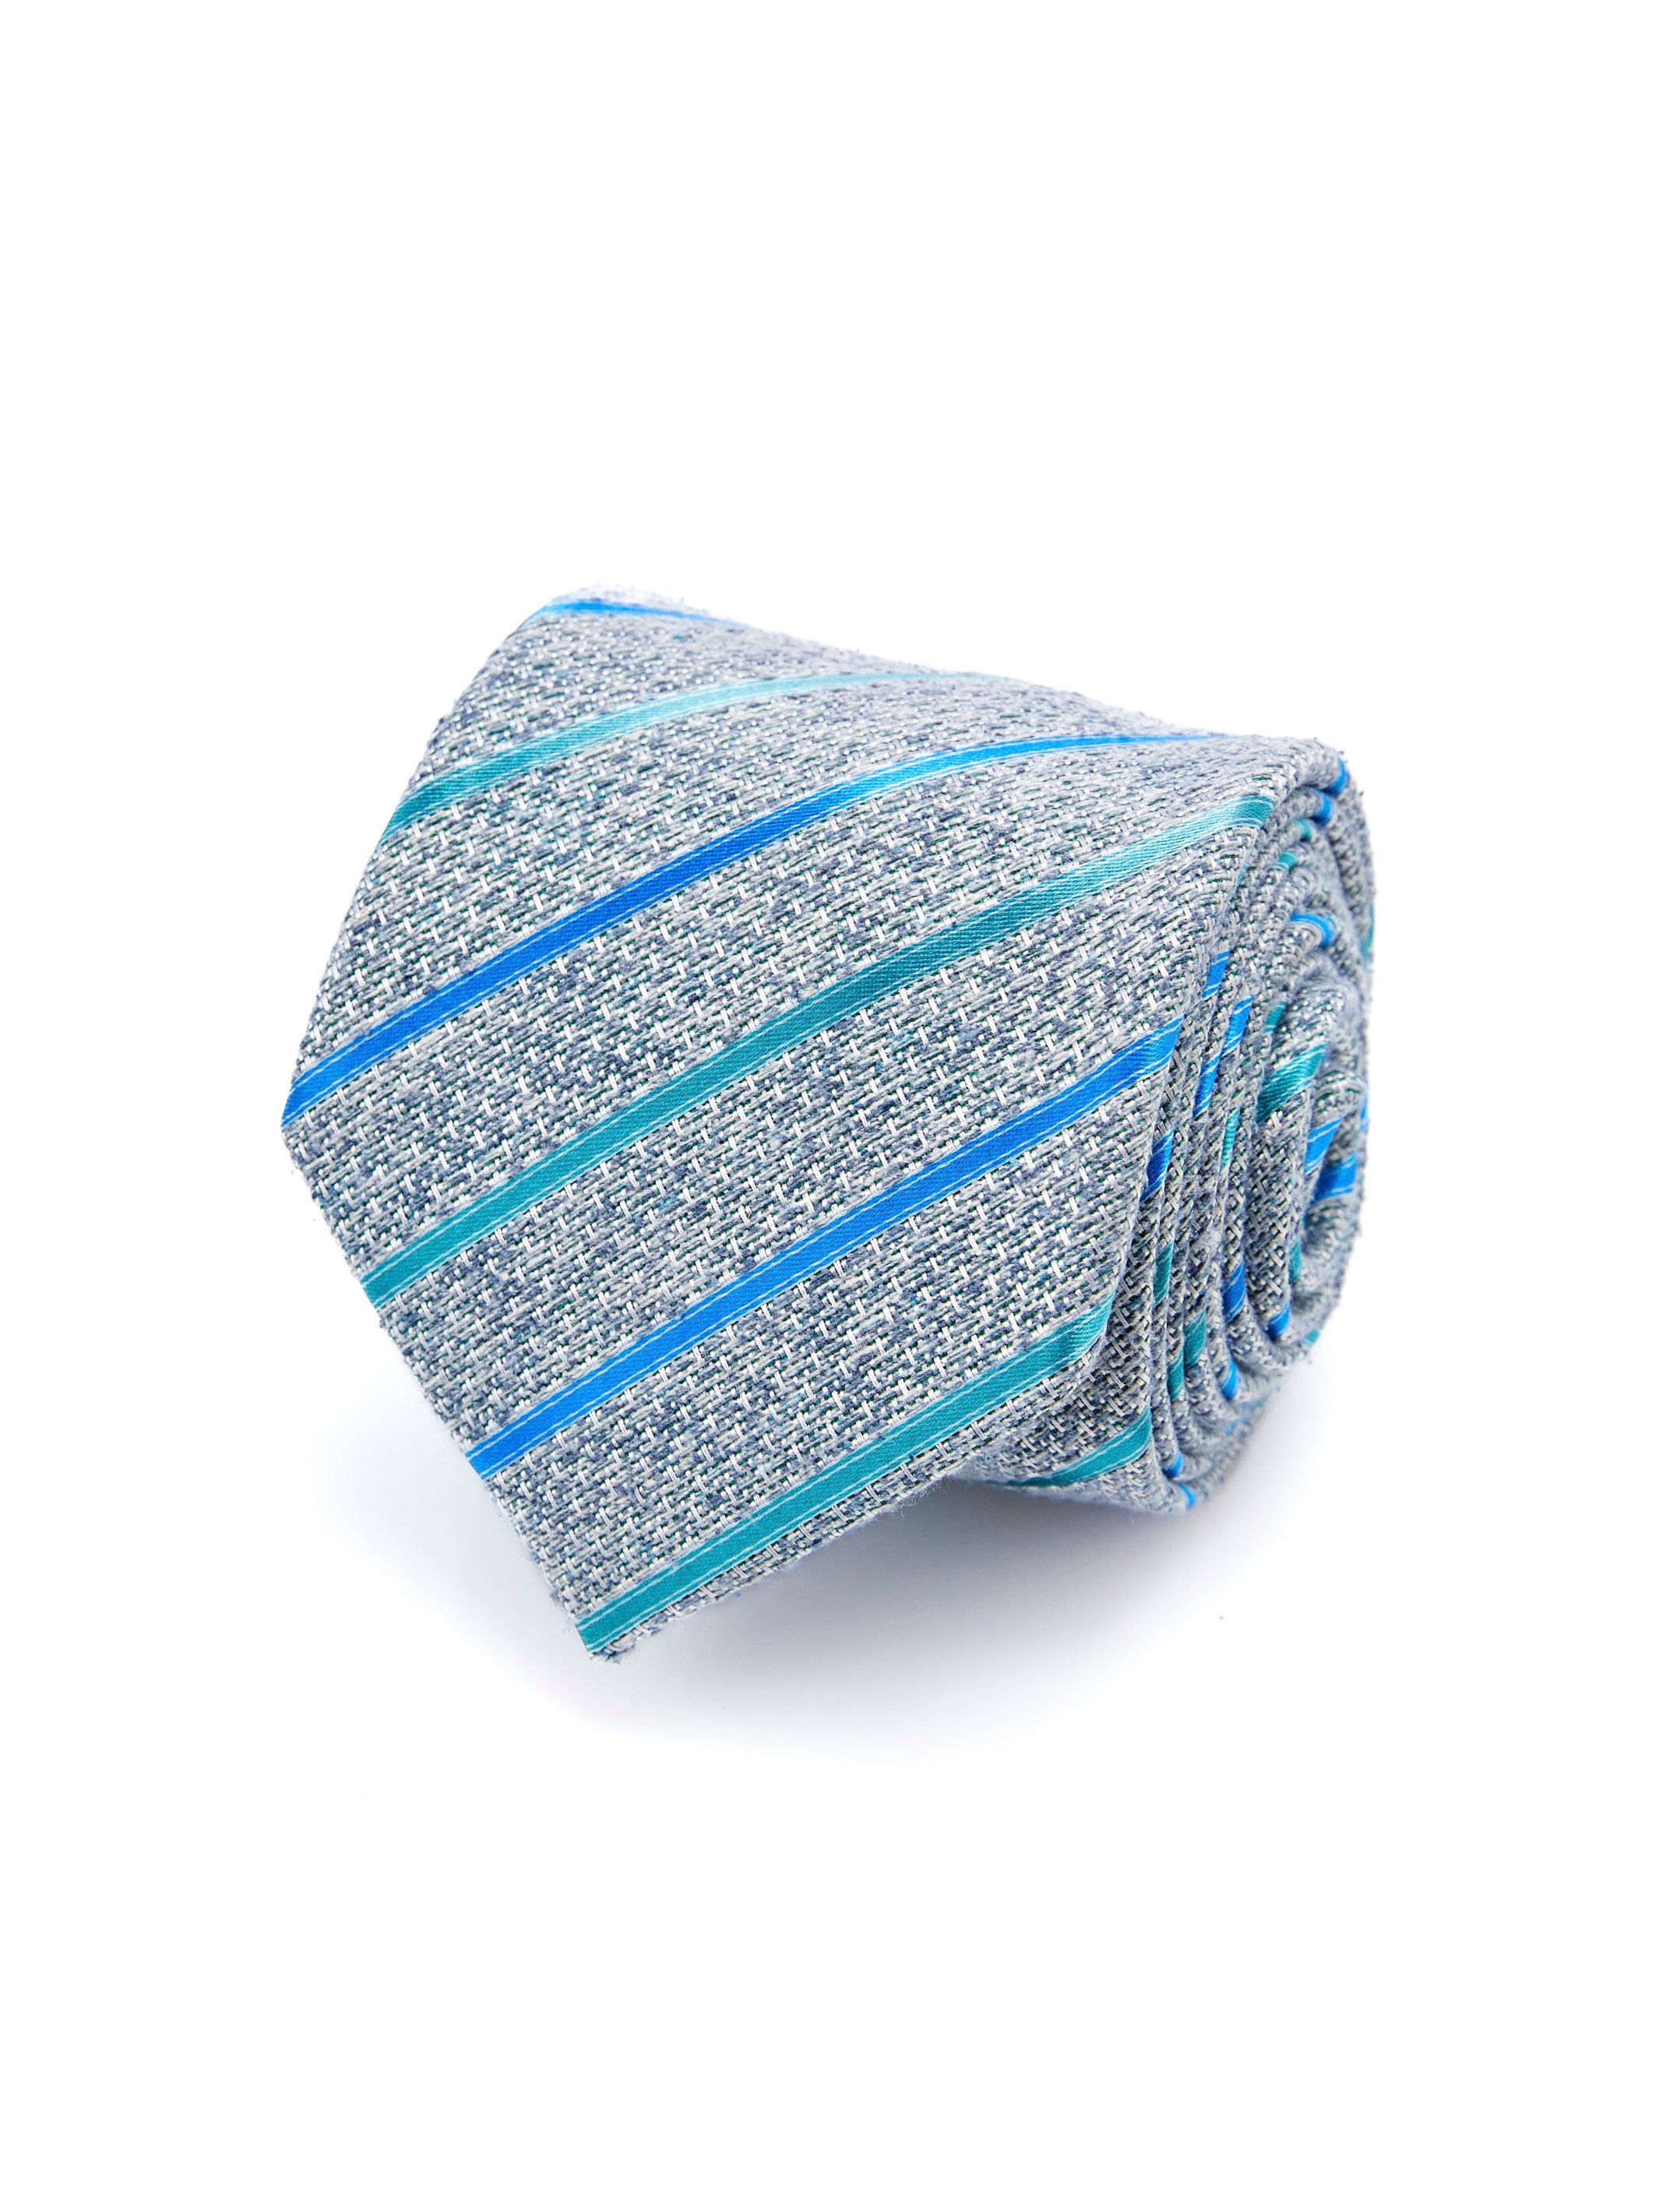 Turquoise striped tie